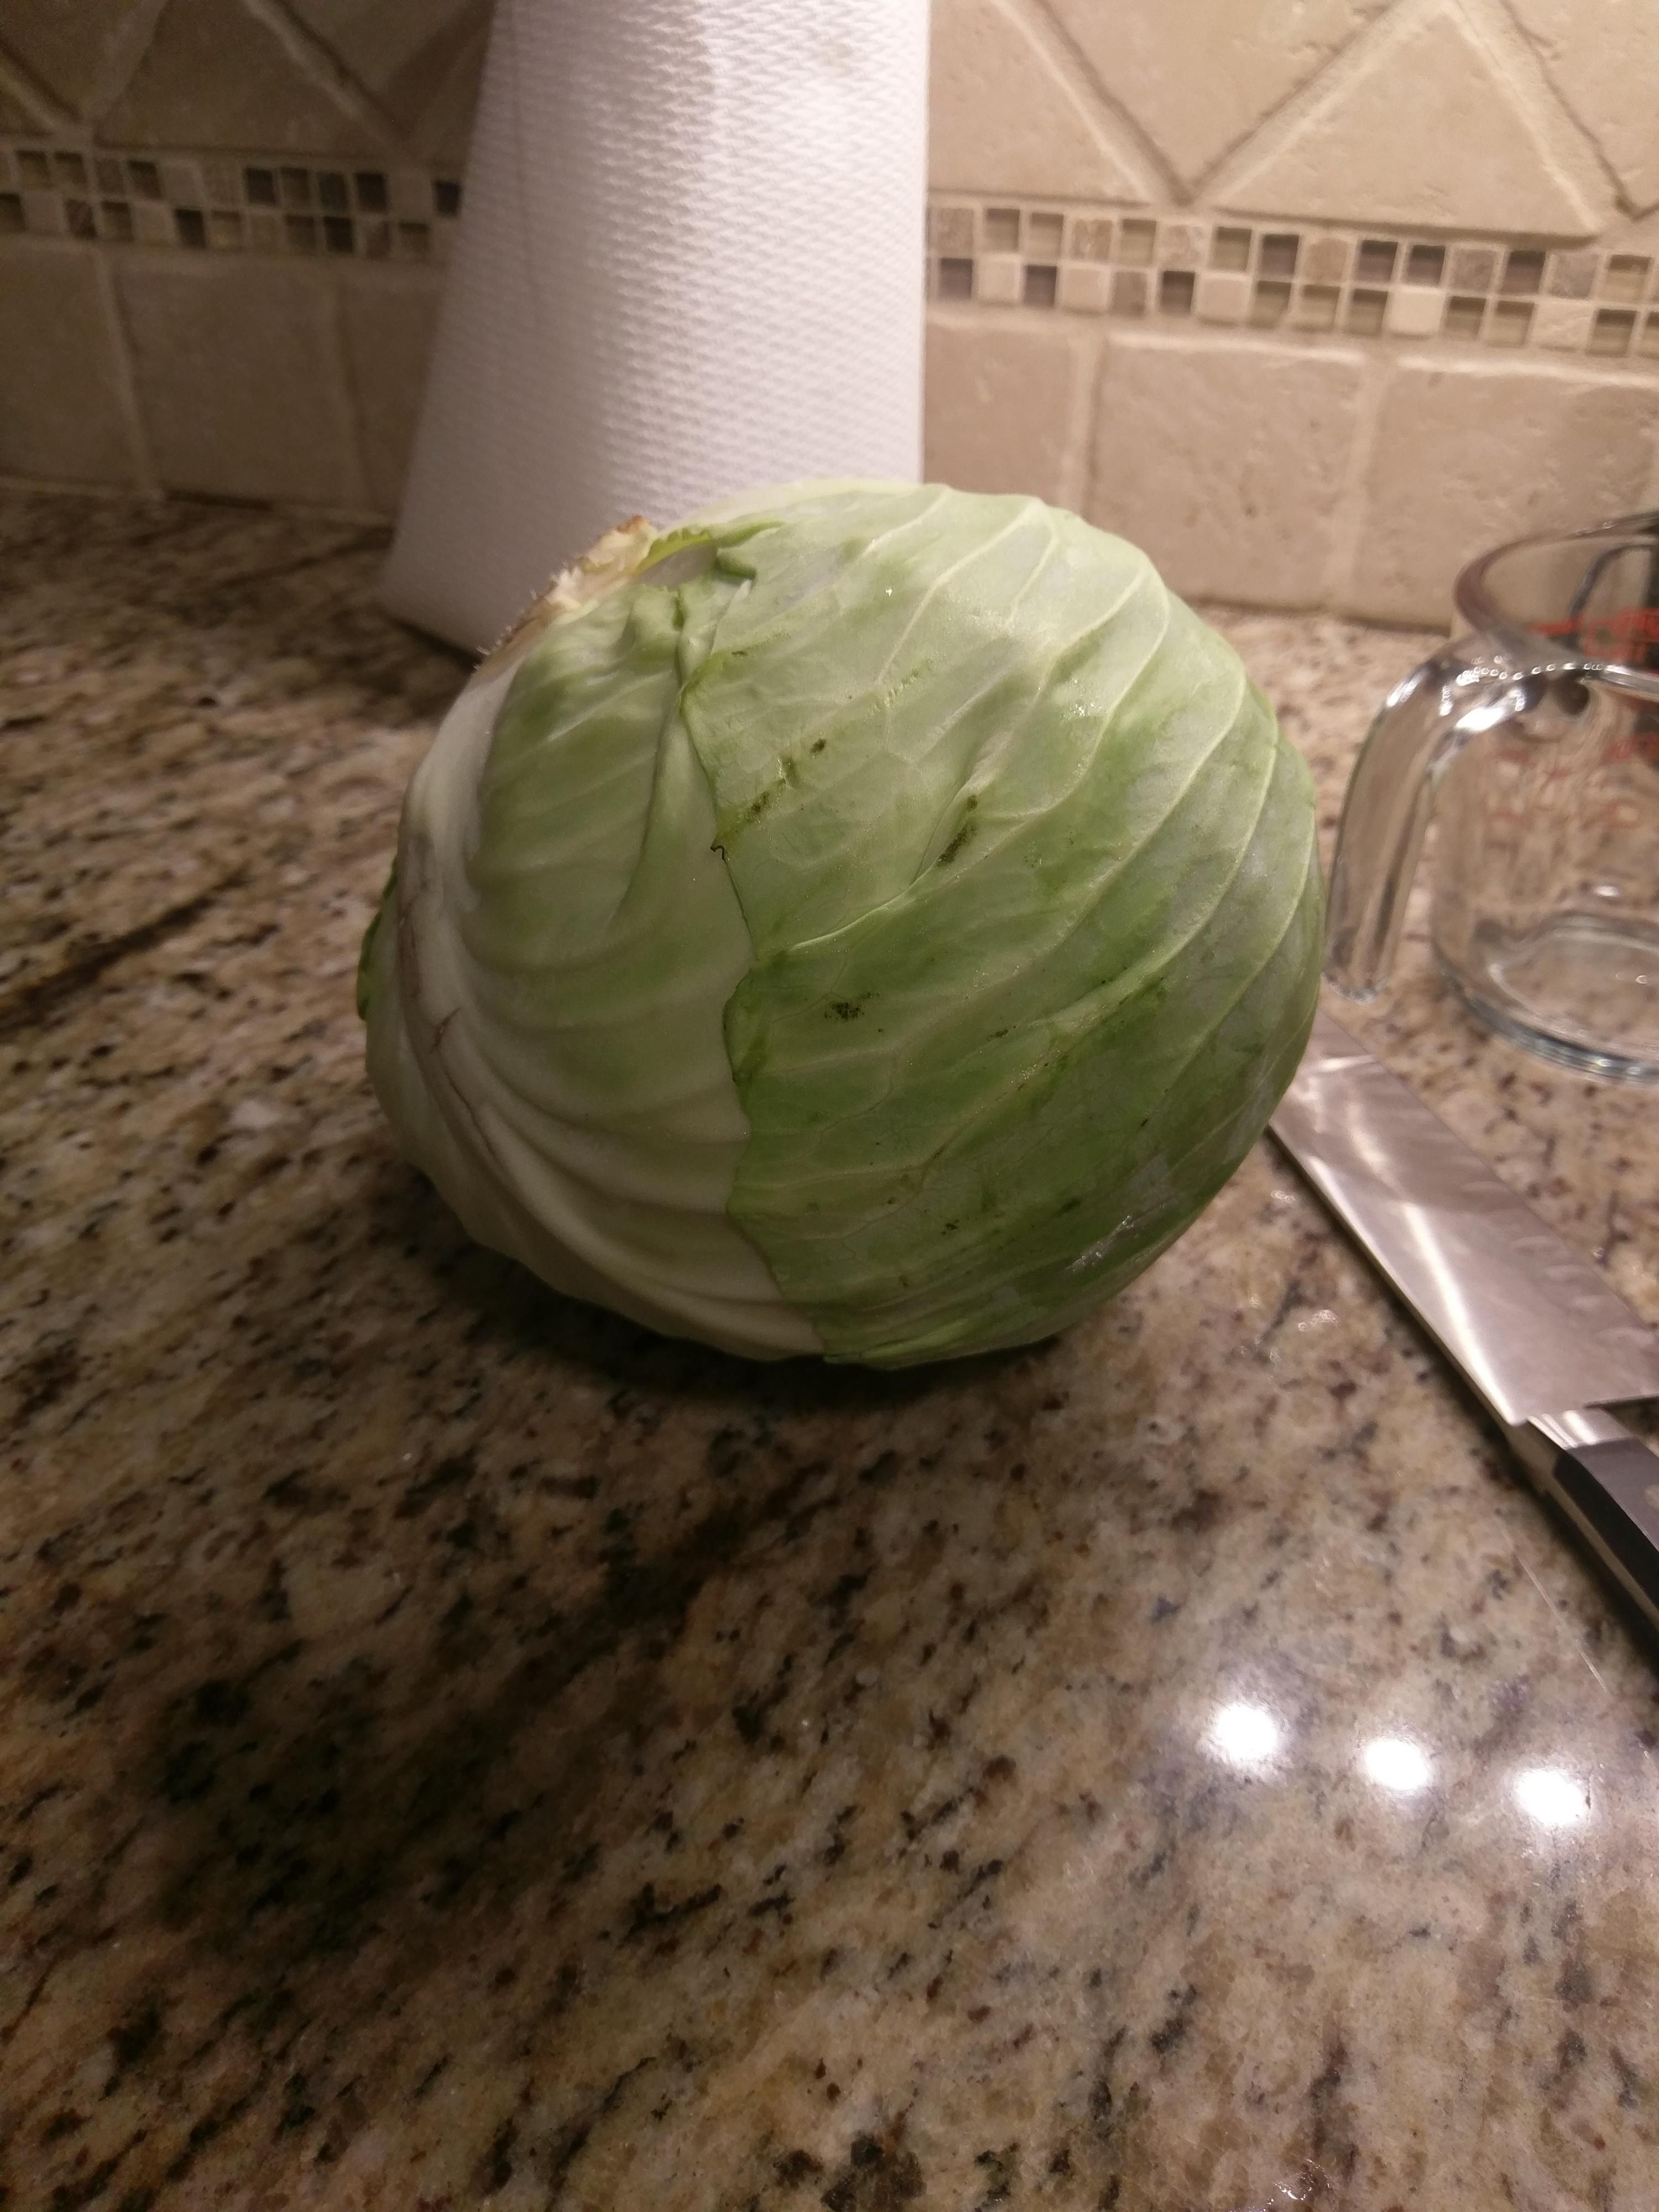 When you send your husband to the store for "lettuce". At first I was mad he got iceburg, then I was mad he didn't get iceburg.